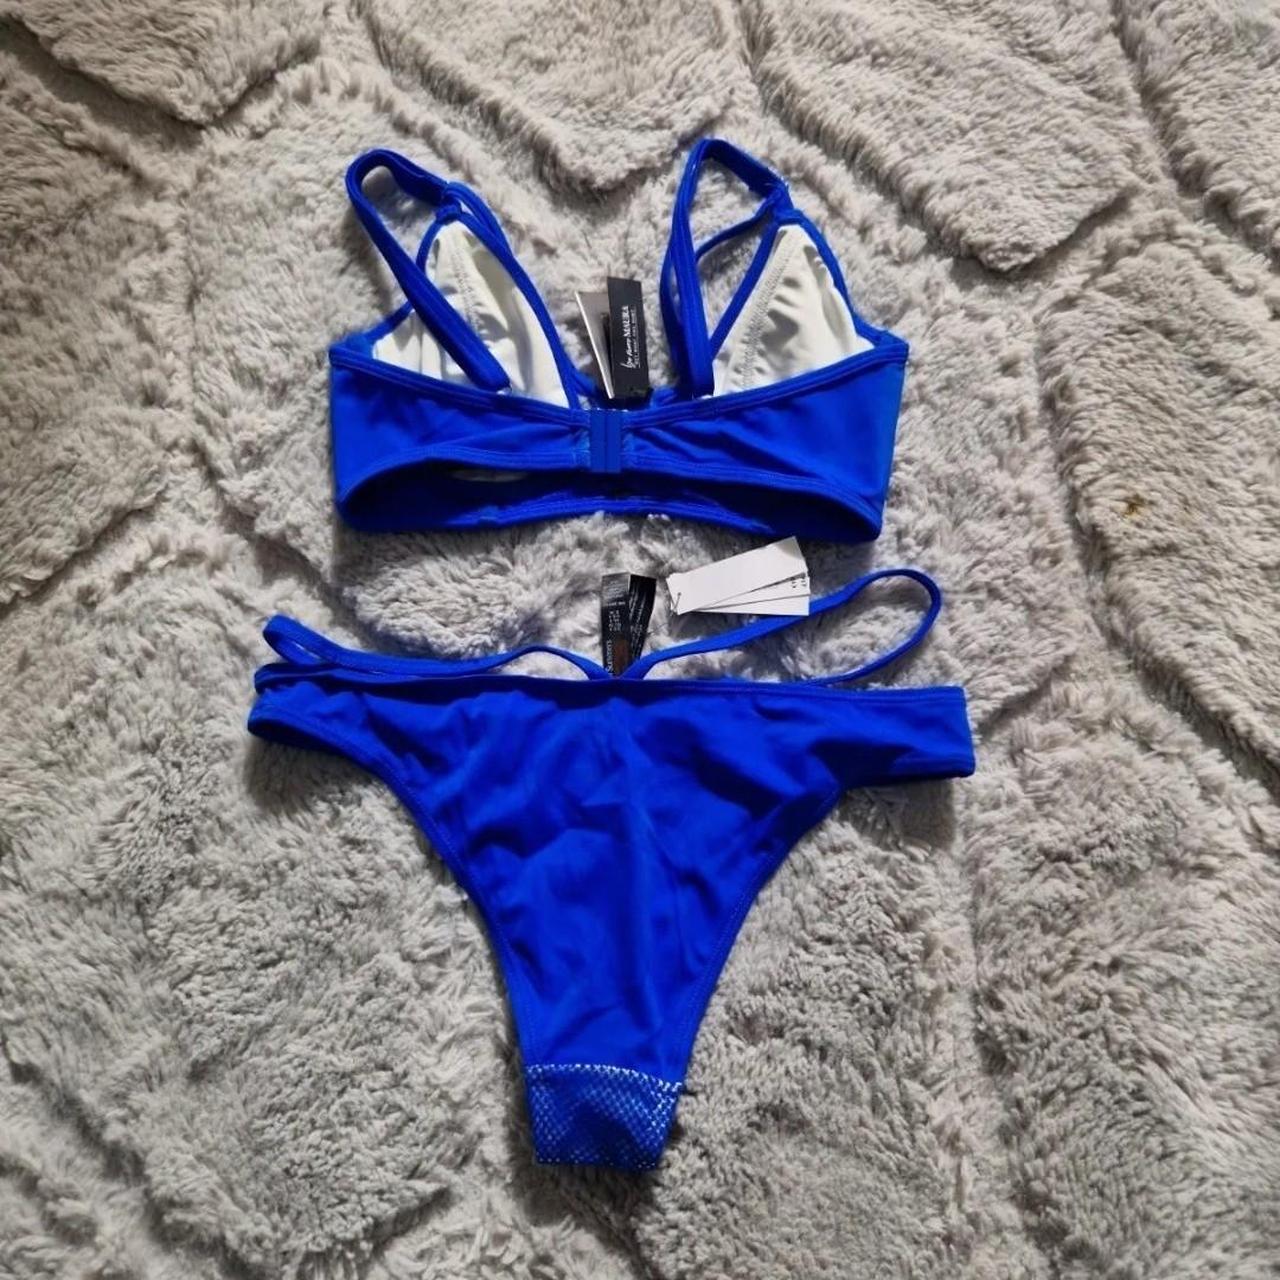 Ann Summers Women's Blue and Silver Bikinis-and-tankini-sets | Depop